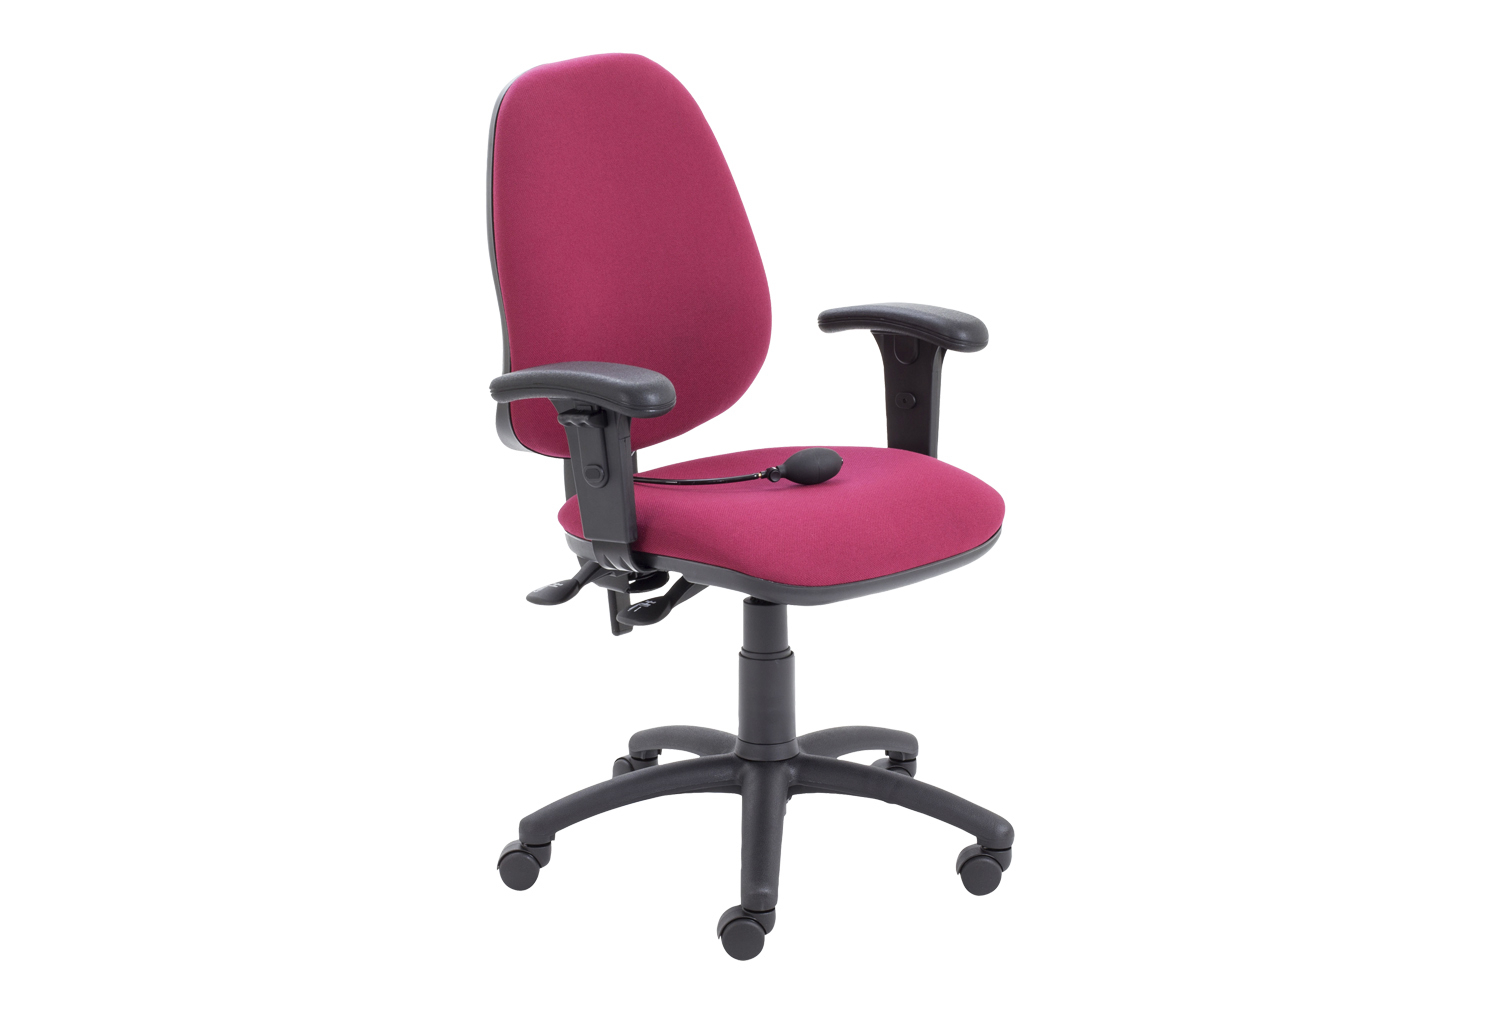 Orchid Lumbar Pump Ergonomic Operator Office Chair With Height Adjustable Arms, Burgundy, Fully Installed